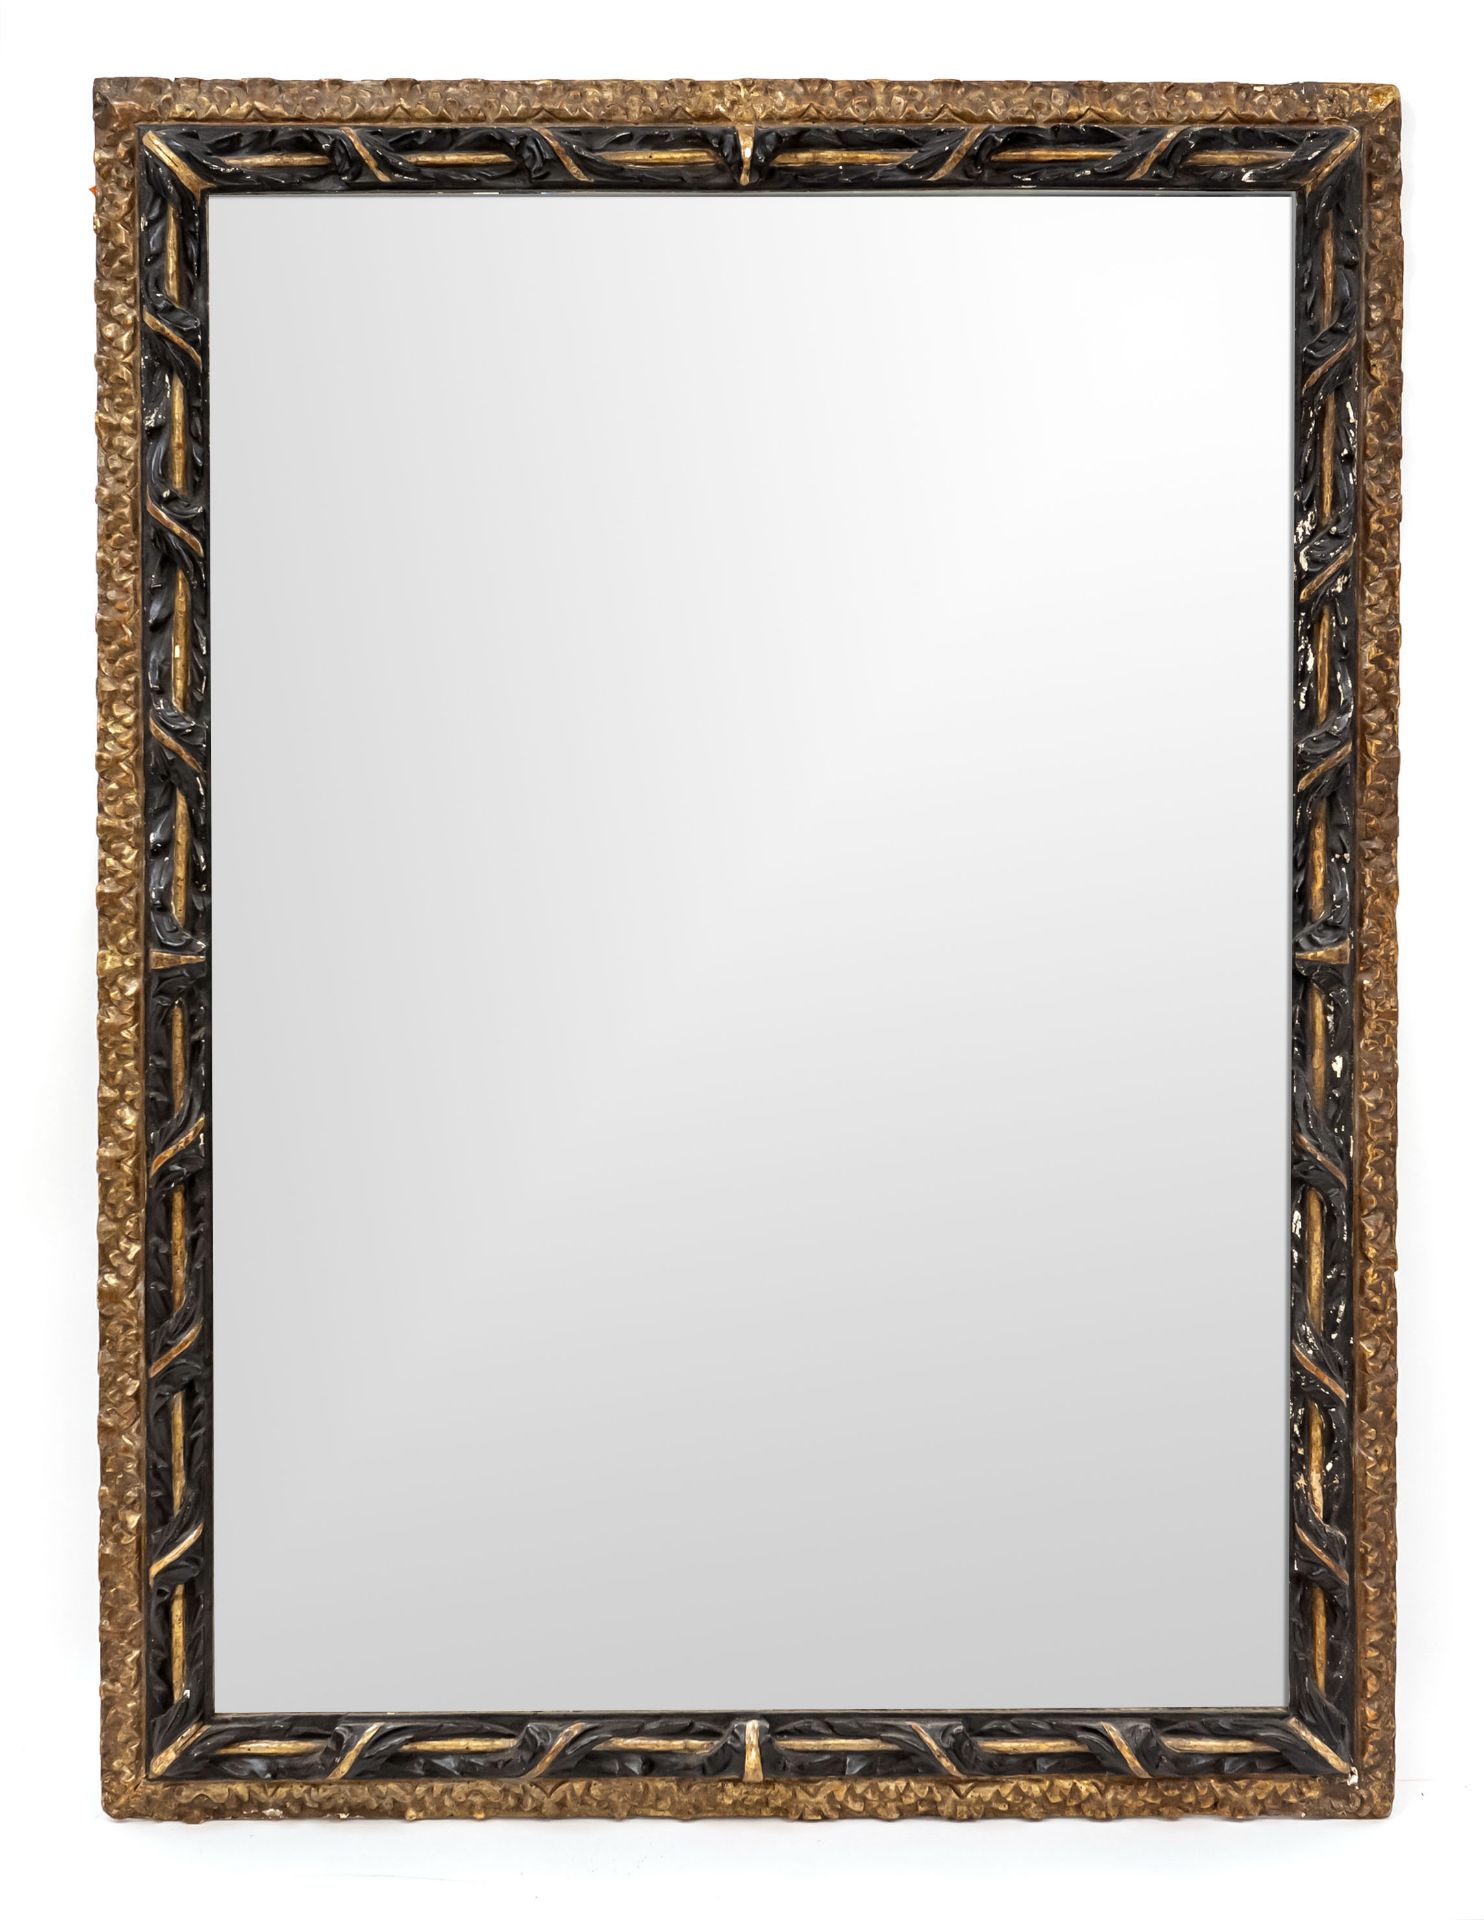 Large dressing mirror, frame Italy 17th century, wood carved, ebonized and gilded, mirror with facet